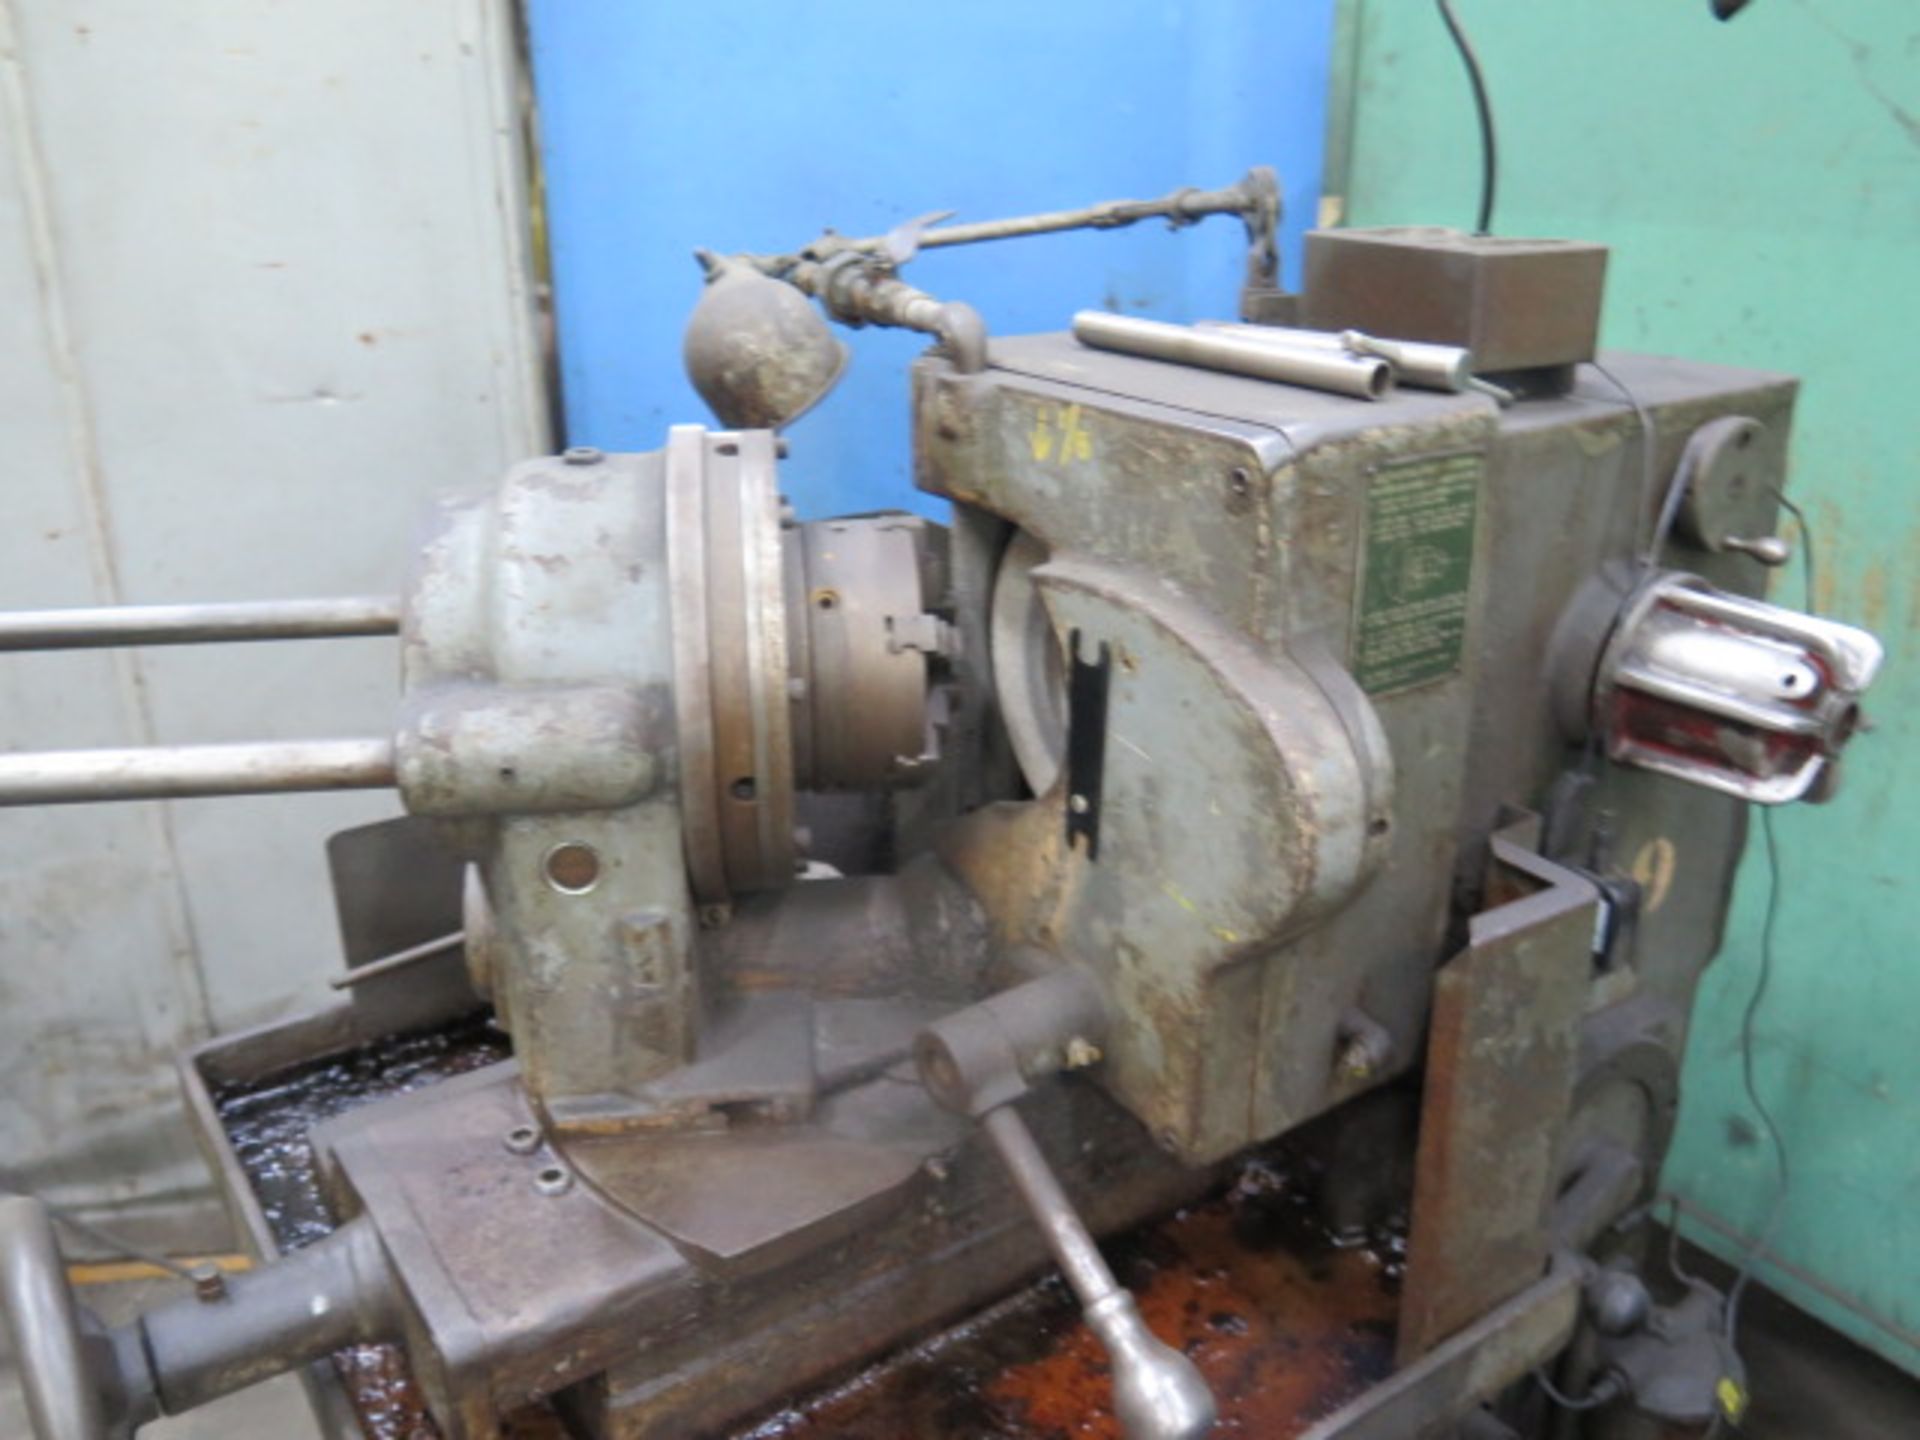 Oliver Adrian mdl. 600 Large Diameter Drill Sharpener s/n G-6618 (SOLD AS-IS - NO WARRANTY) - Image 3 of 8